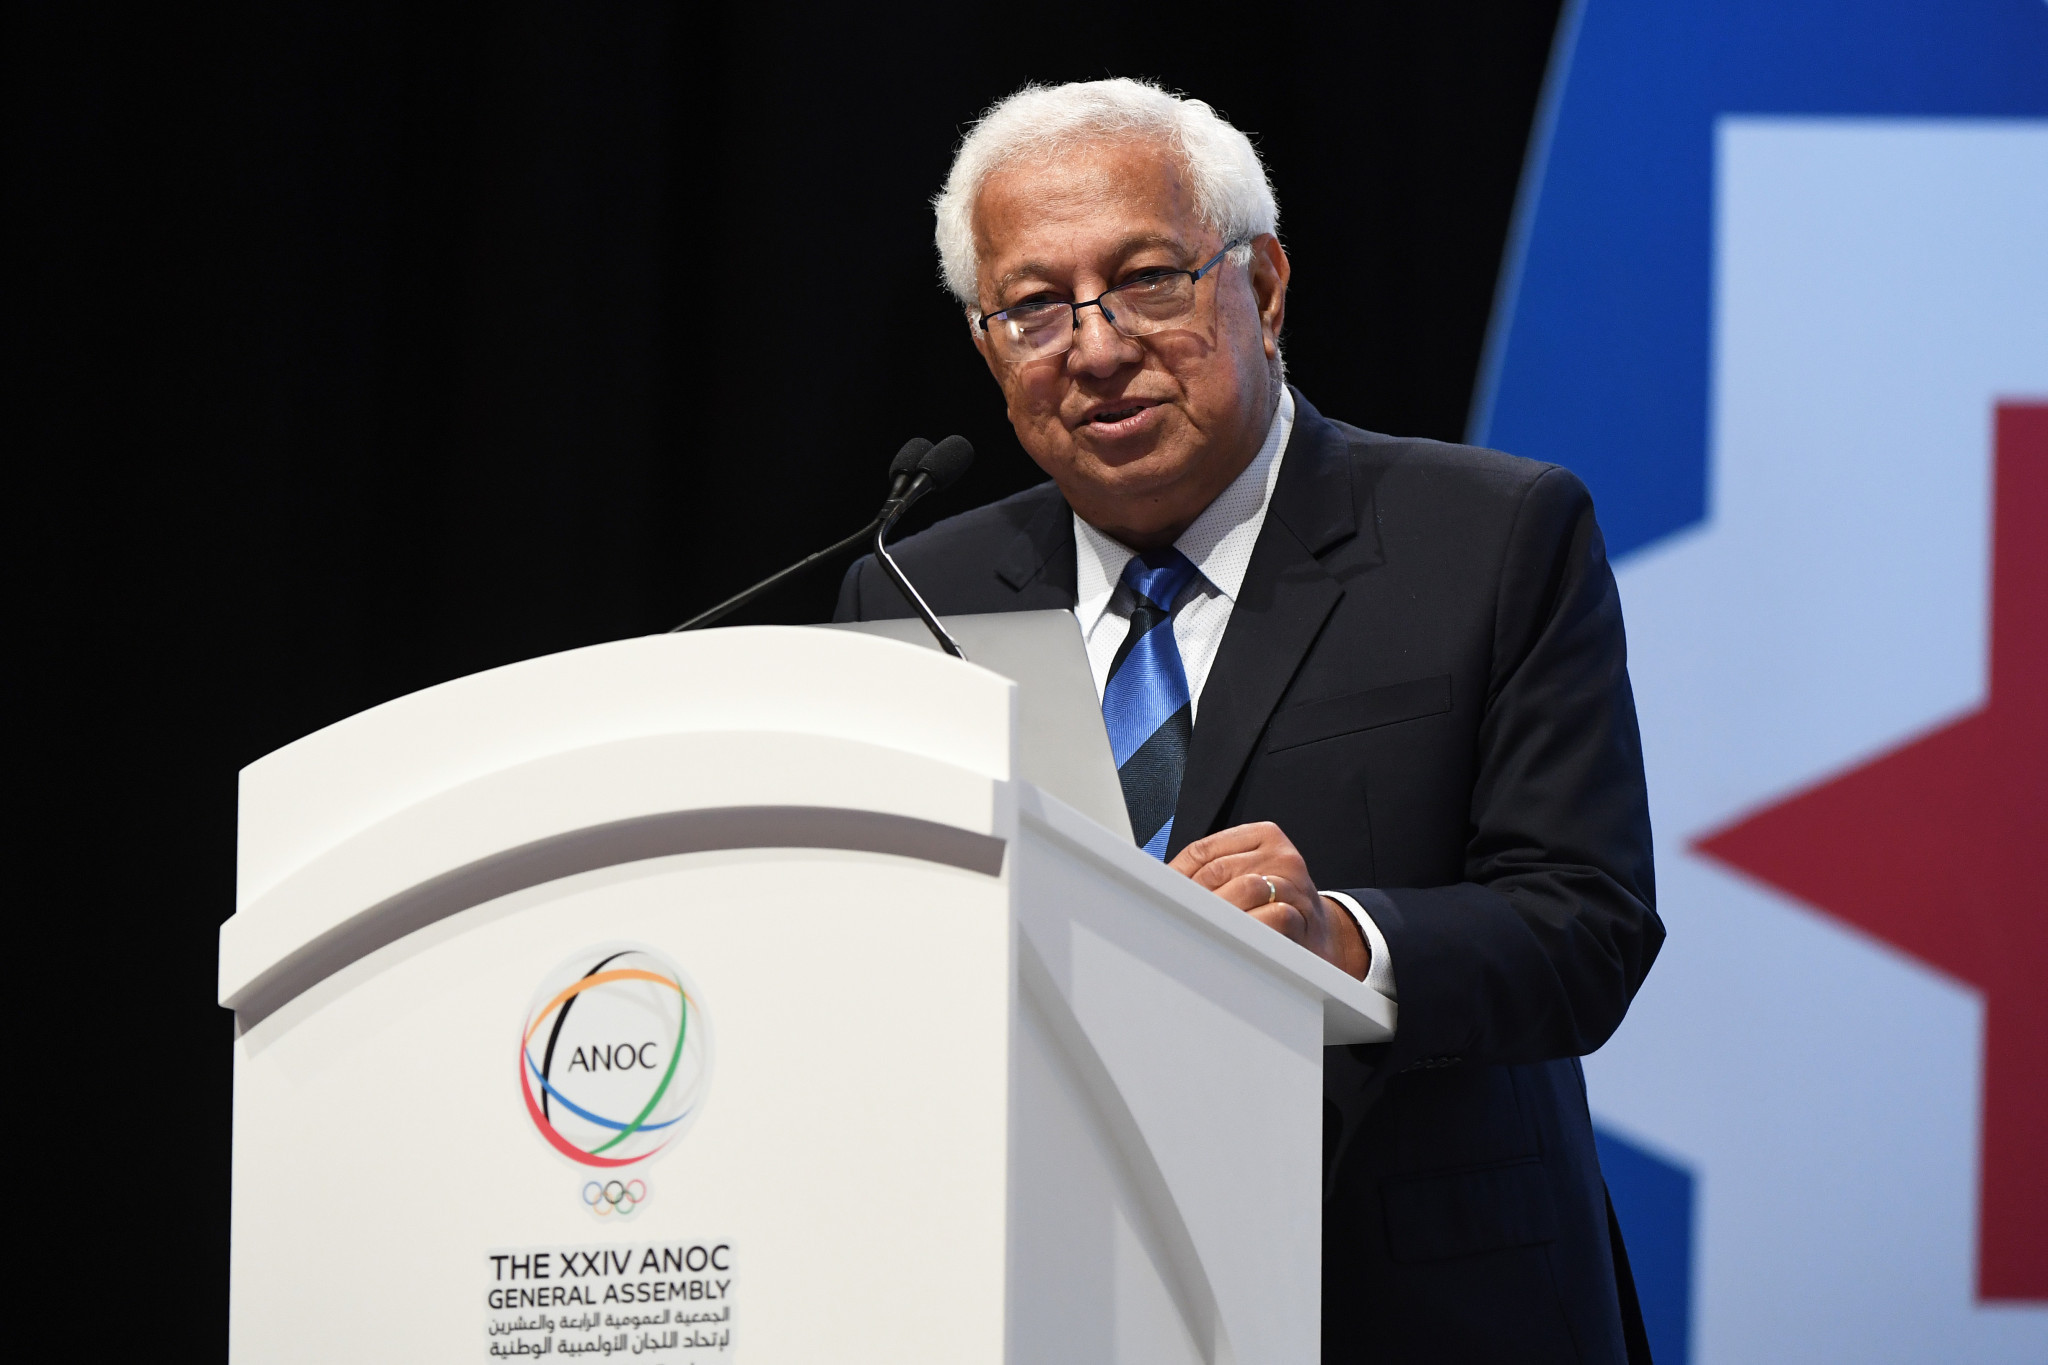 ANOC Acting President Mitchell backs COVID-19 protocols at Beijing 2022